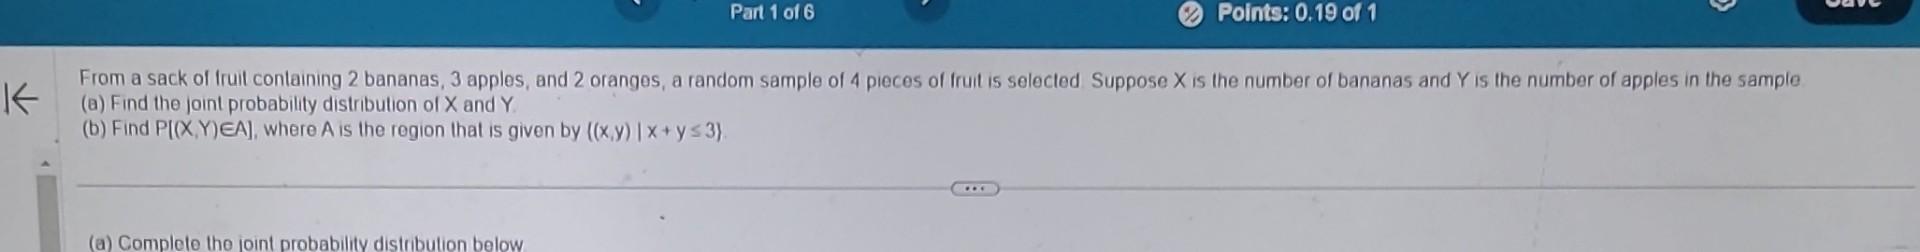 From a sack of Iruit containing 2 bananas, 3 apples, and 2 oranges, a random sample of 4 pieces of fruit is selected Suppose